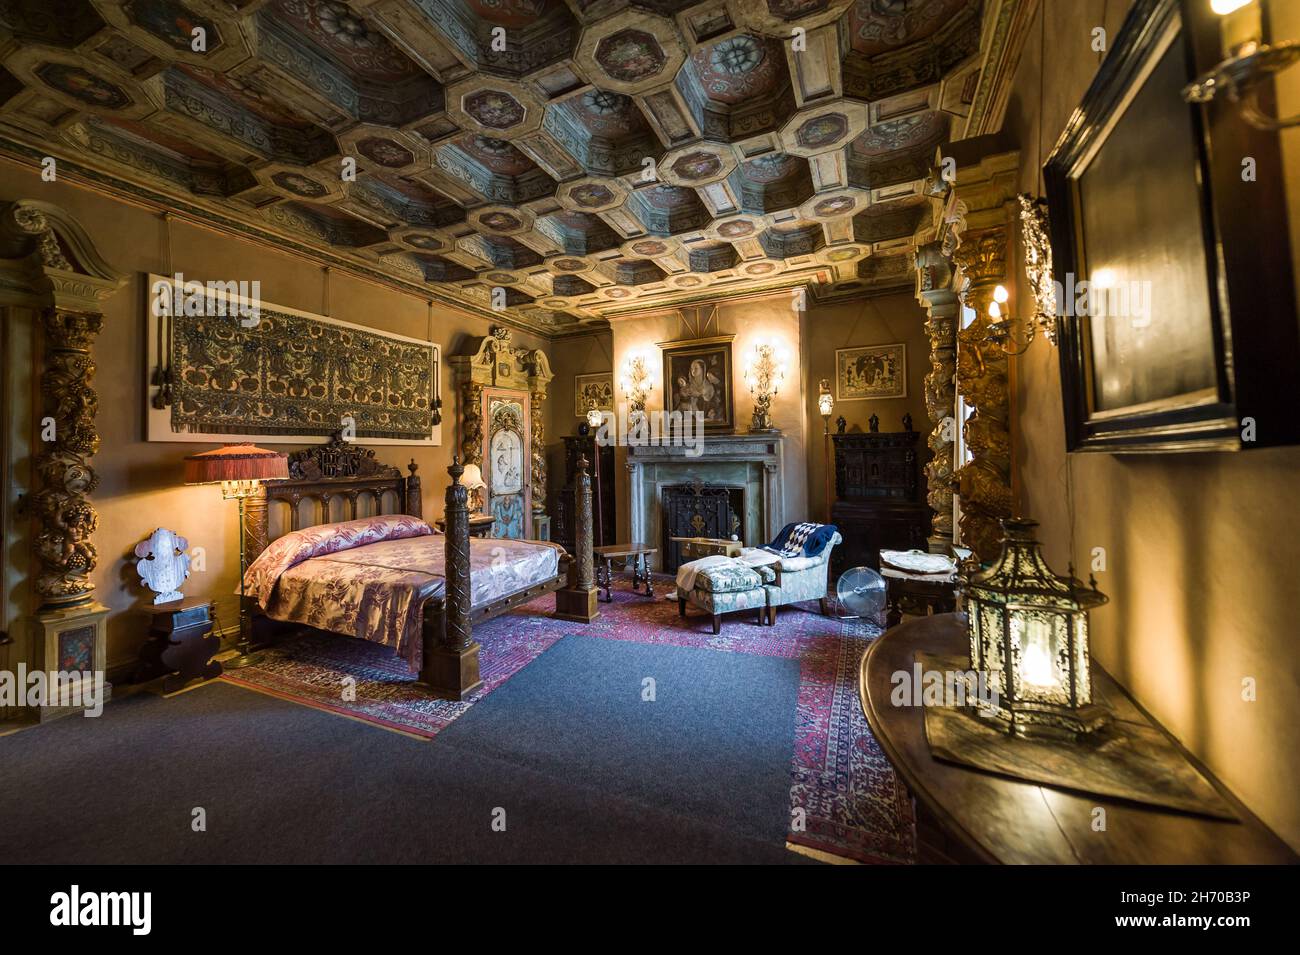 California, USA, 09 Jun 2013: Beautiful and luxurious bedroom with inctricate carvings and designs at Hearst Castle, which is a National and Californi Stock Photo